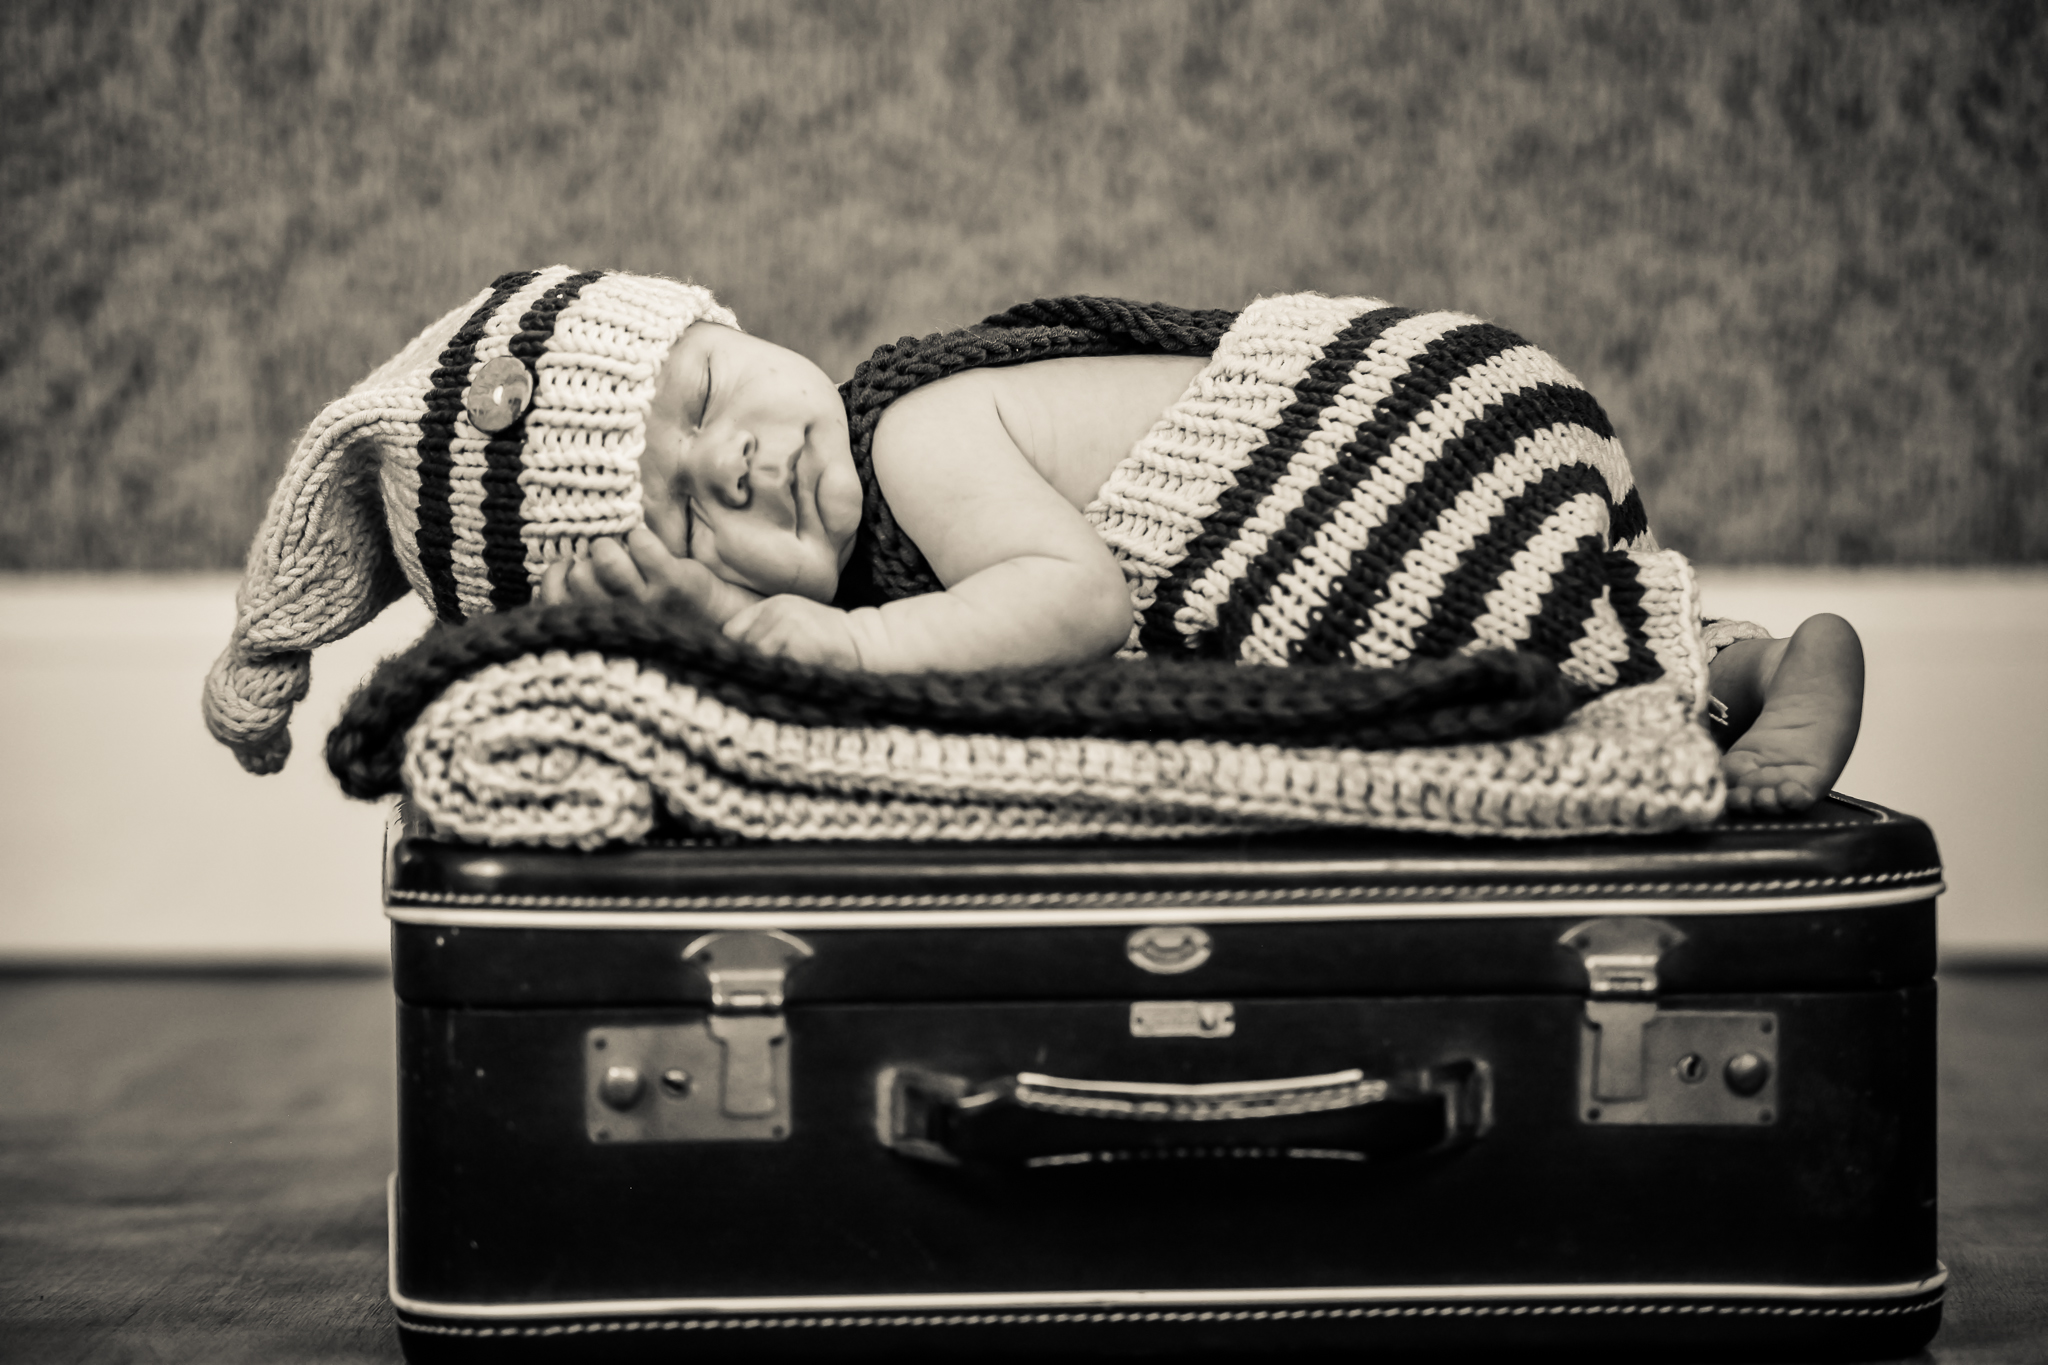 a baby sleeping on a suitcase